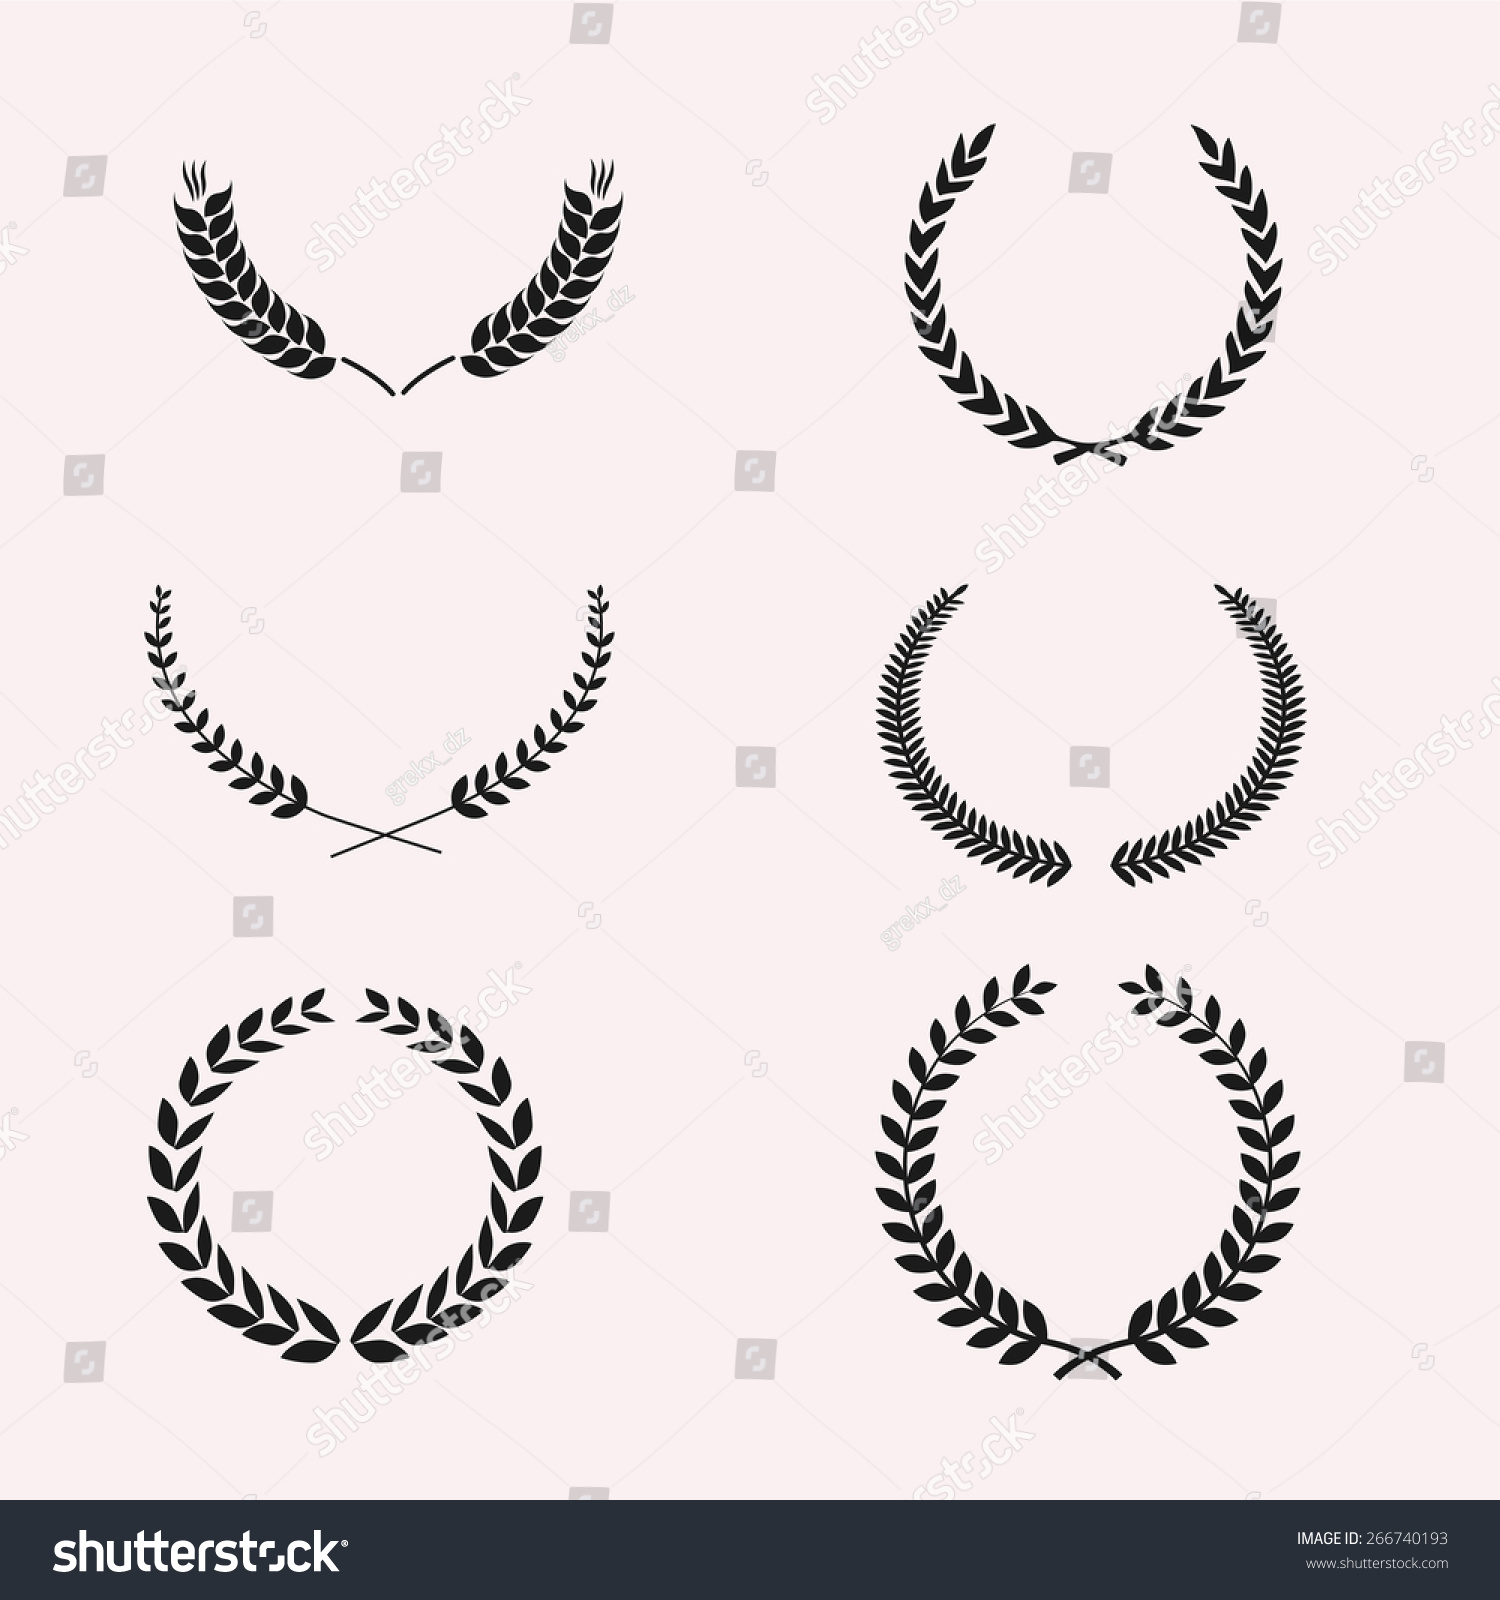 SVG of Set of Wreaths and branches. Vector illustration. Editable for your design svg